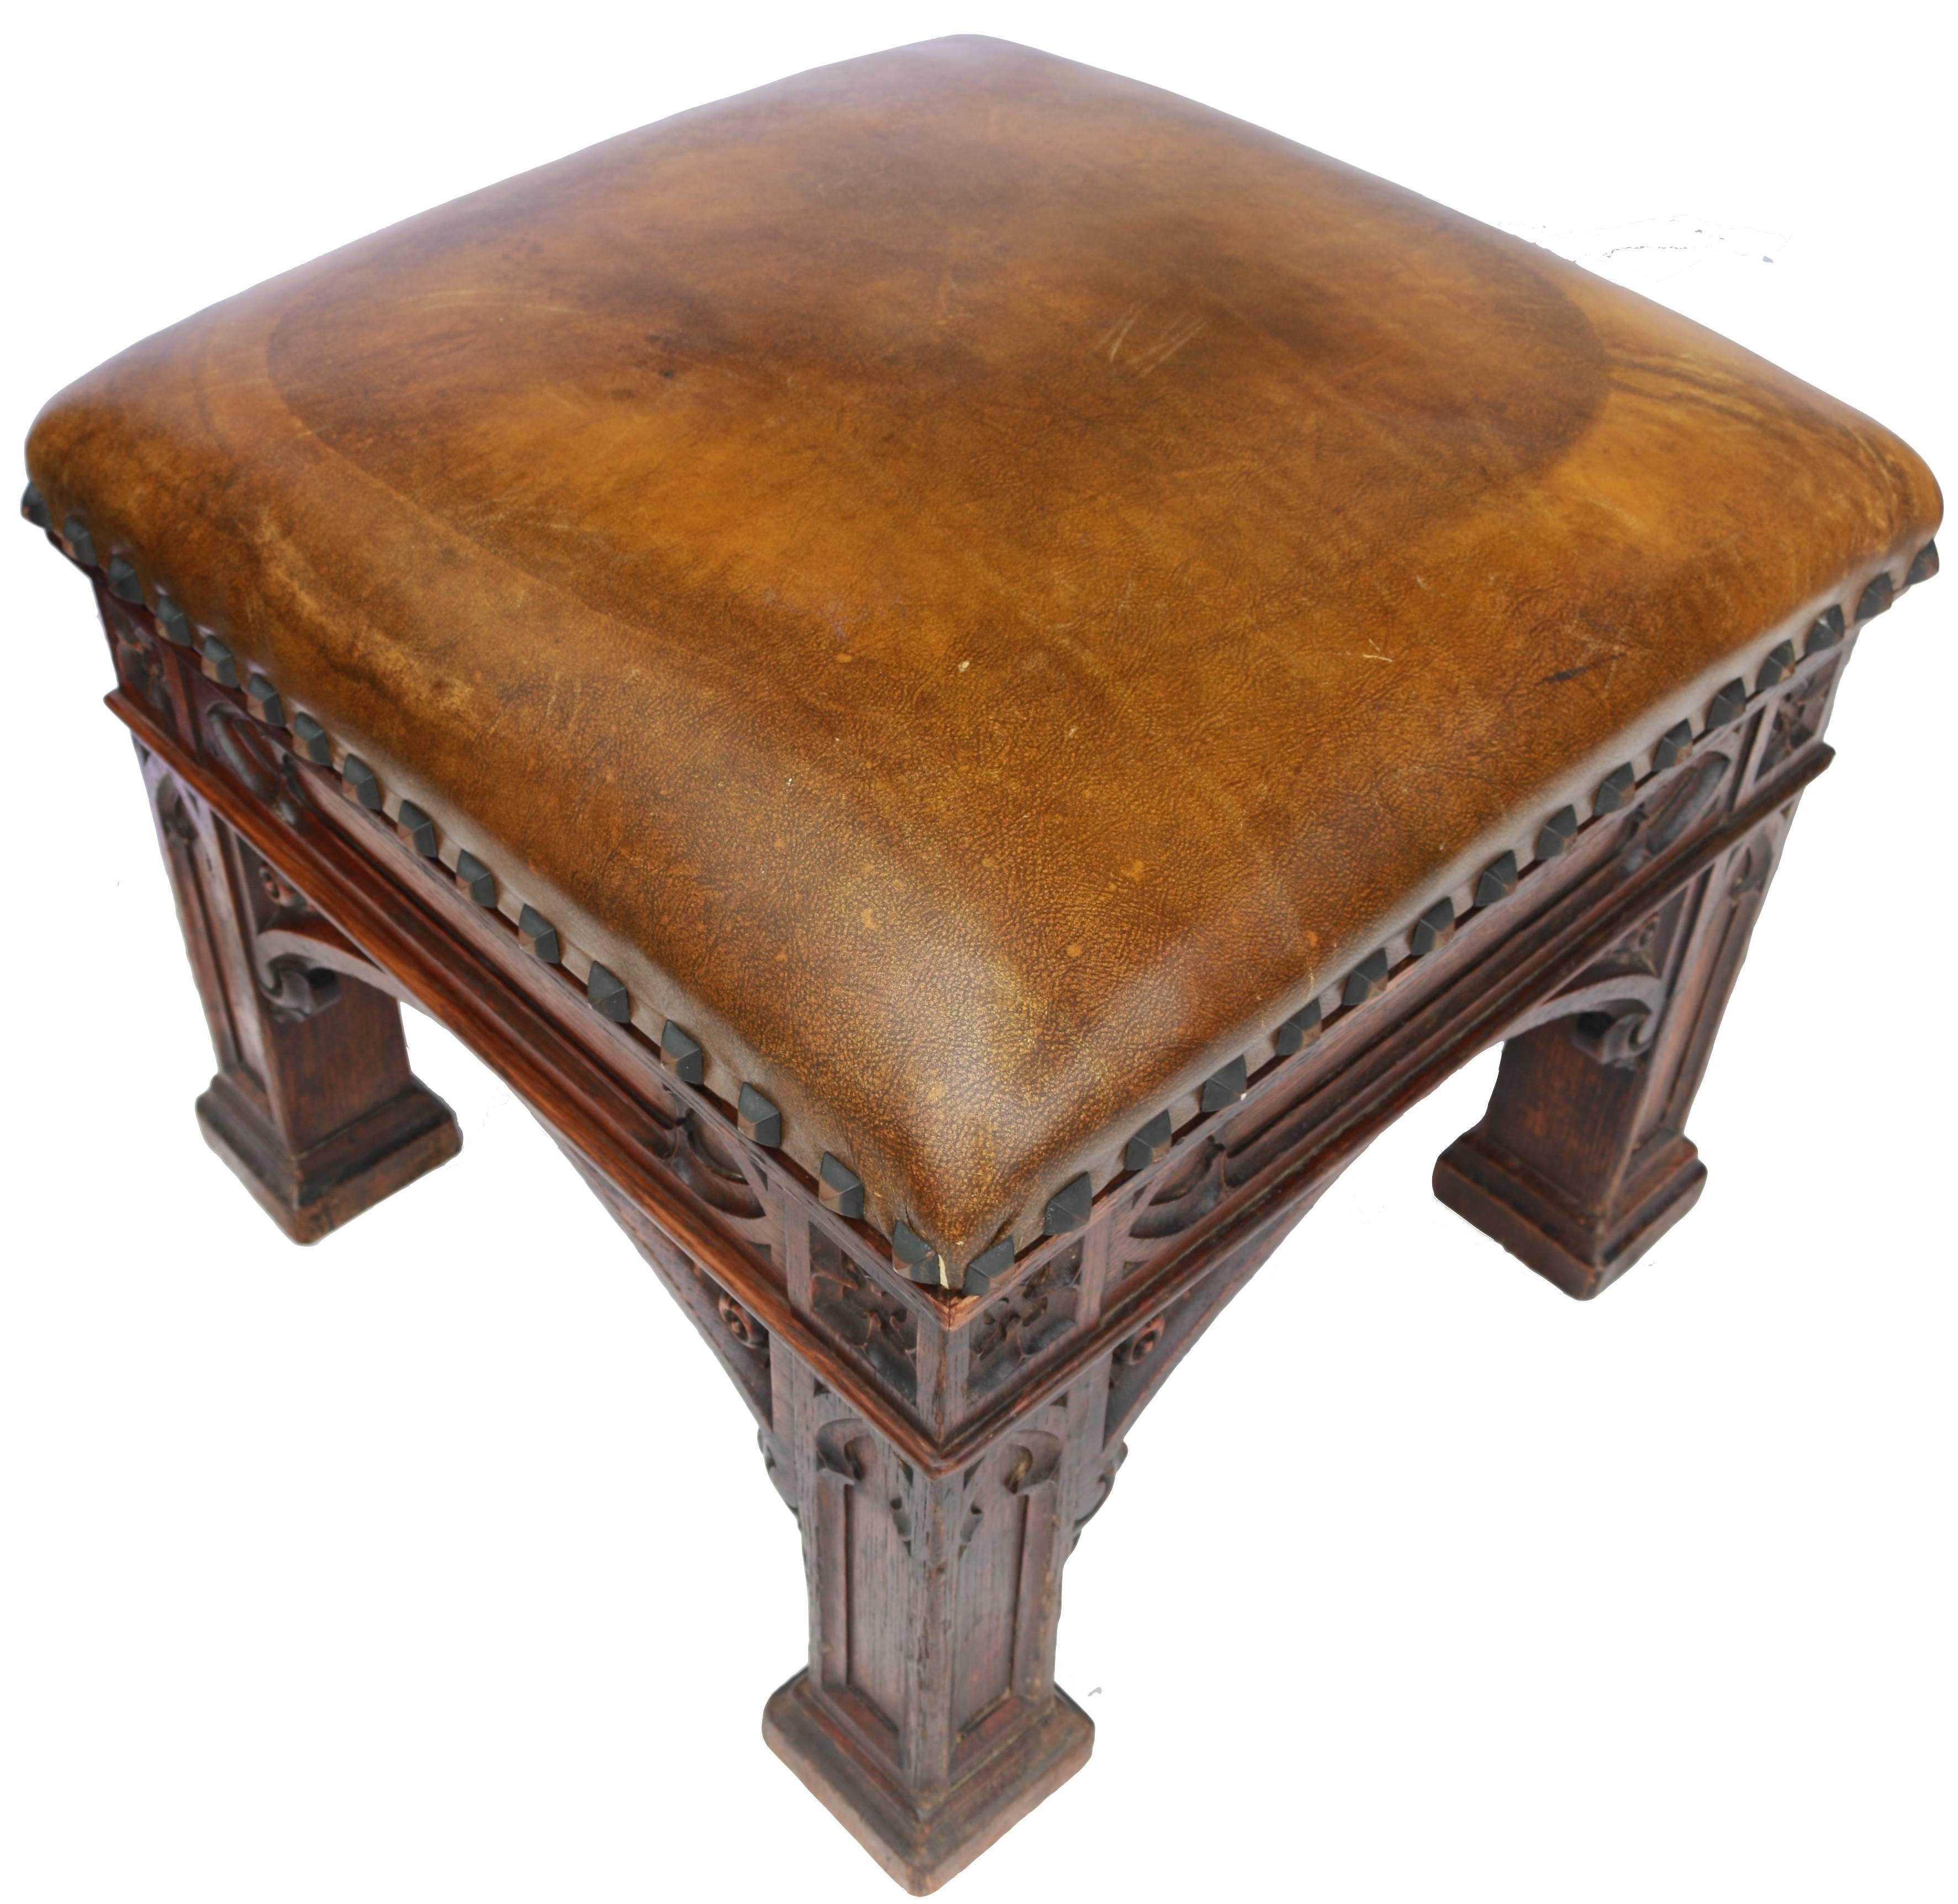 A early 19th century Gothic Revival stool almost identical to designs supplied to Morrel and Seddon from A.W.N. Pugin in 1828.
Examples with subtle differences can be found in the Royal Collection at Windsor Castle.